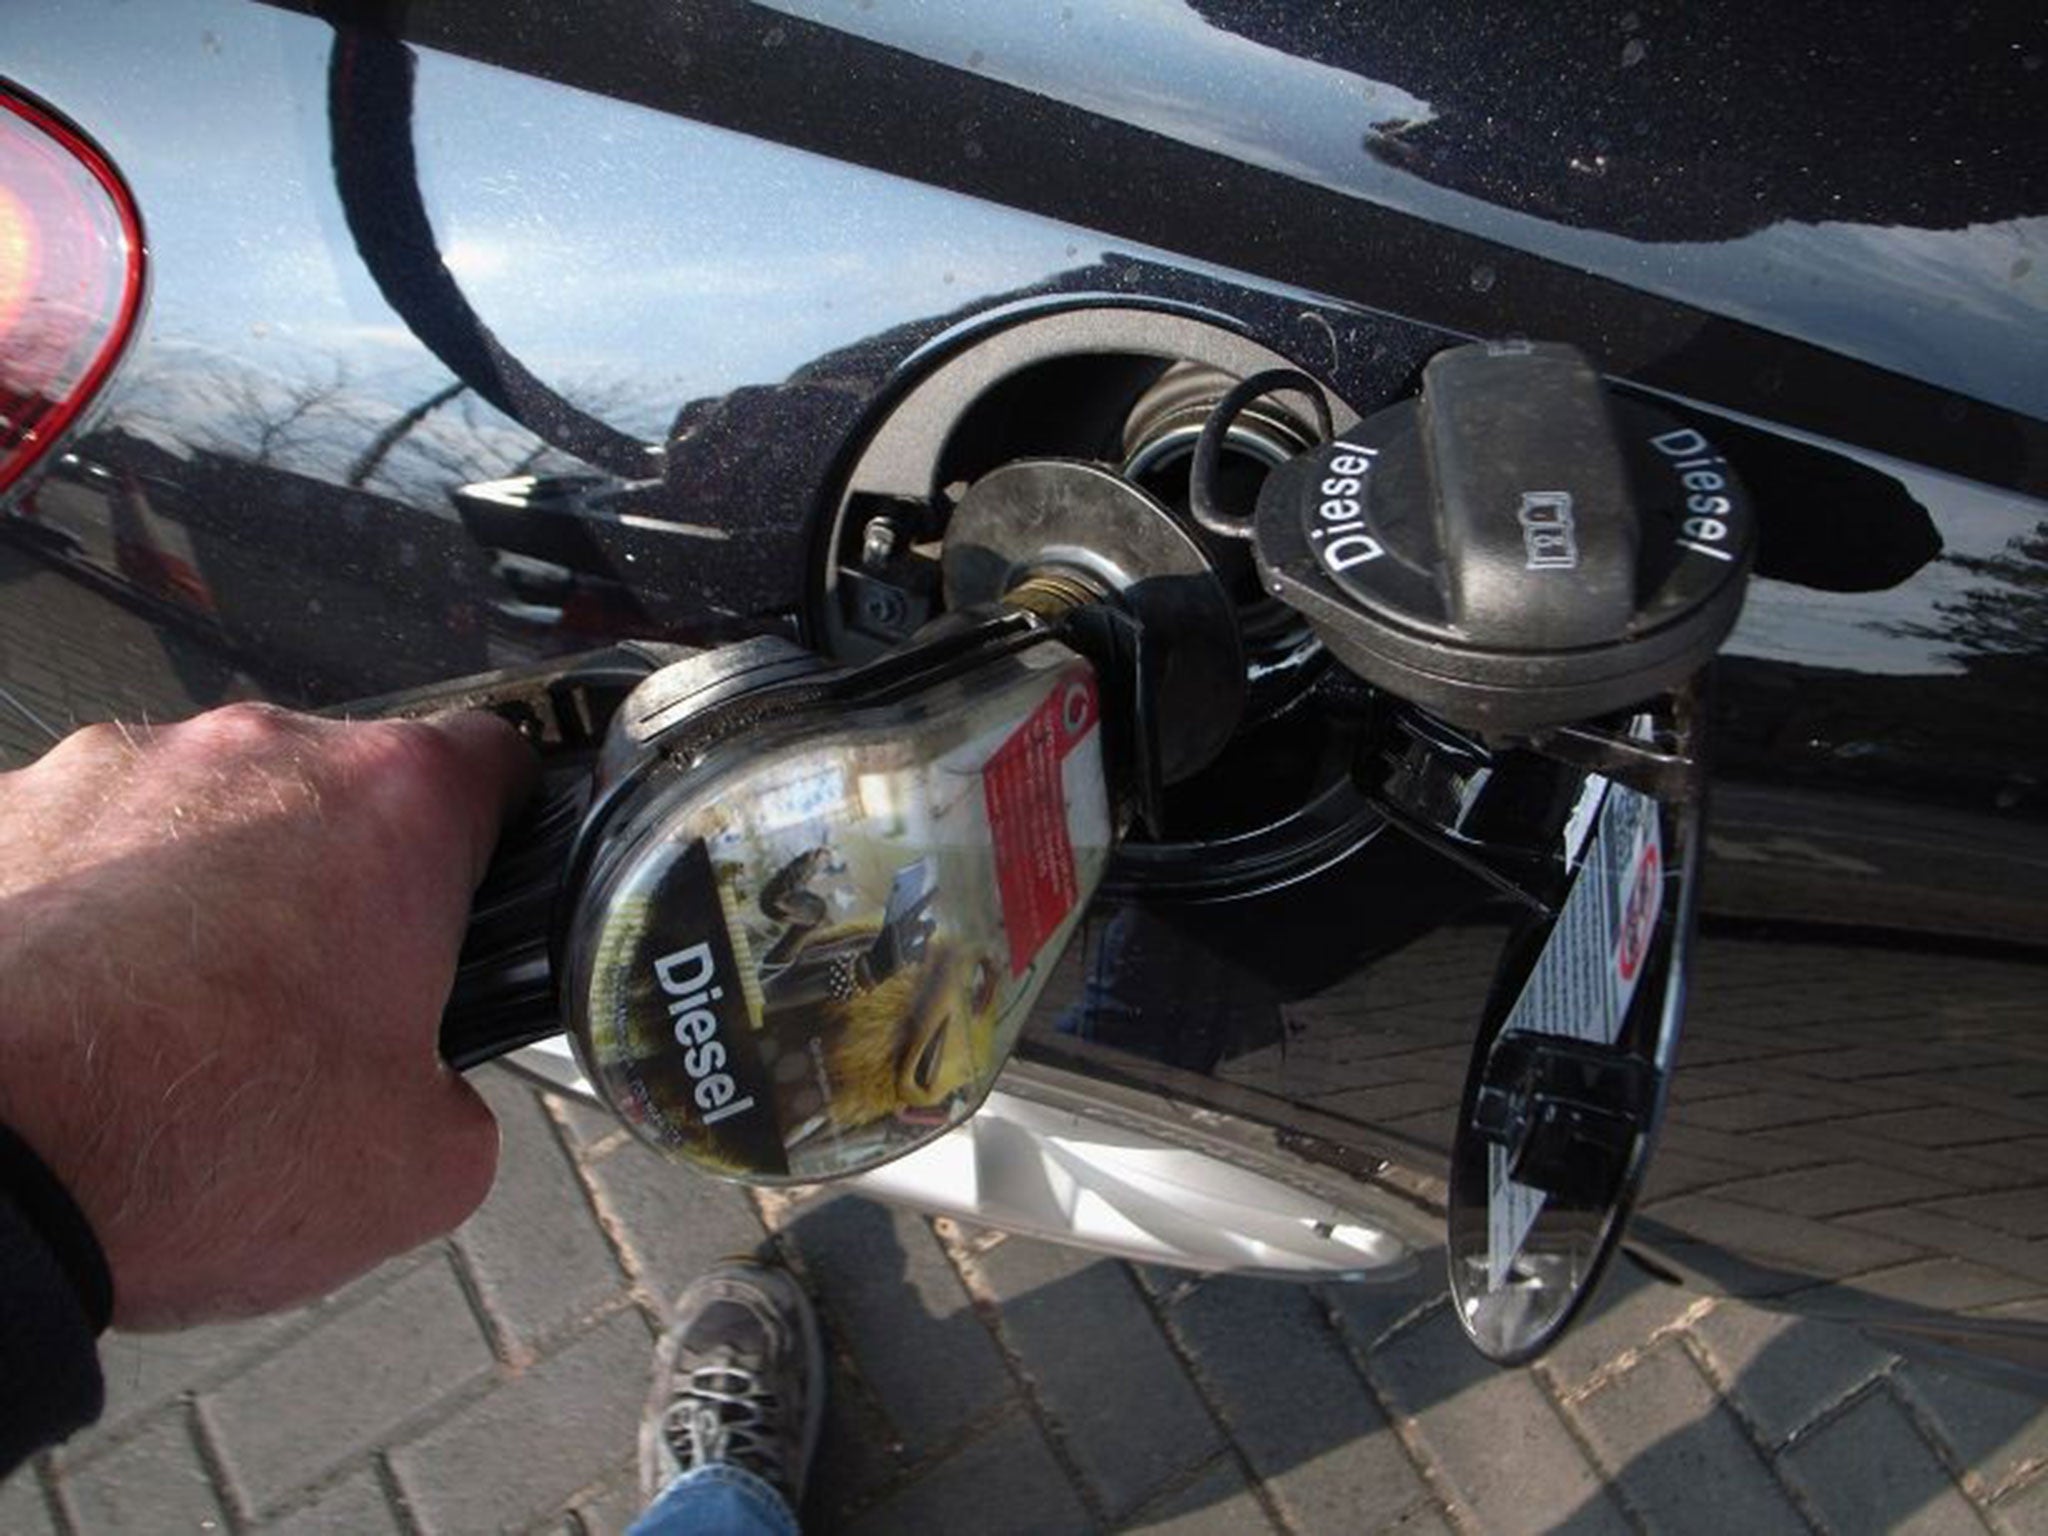 Pump it up: in the first half of 2014, British motorists bought 643,000 diesel cars